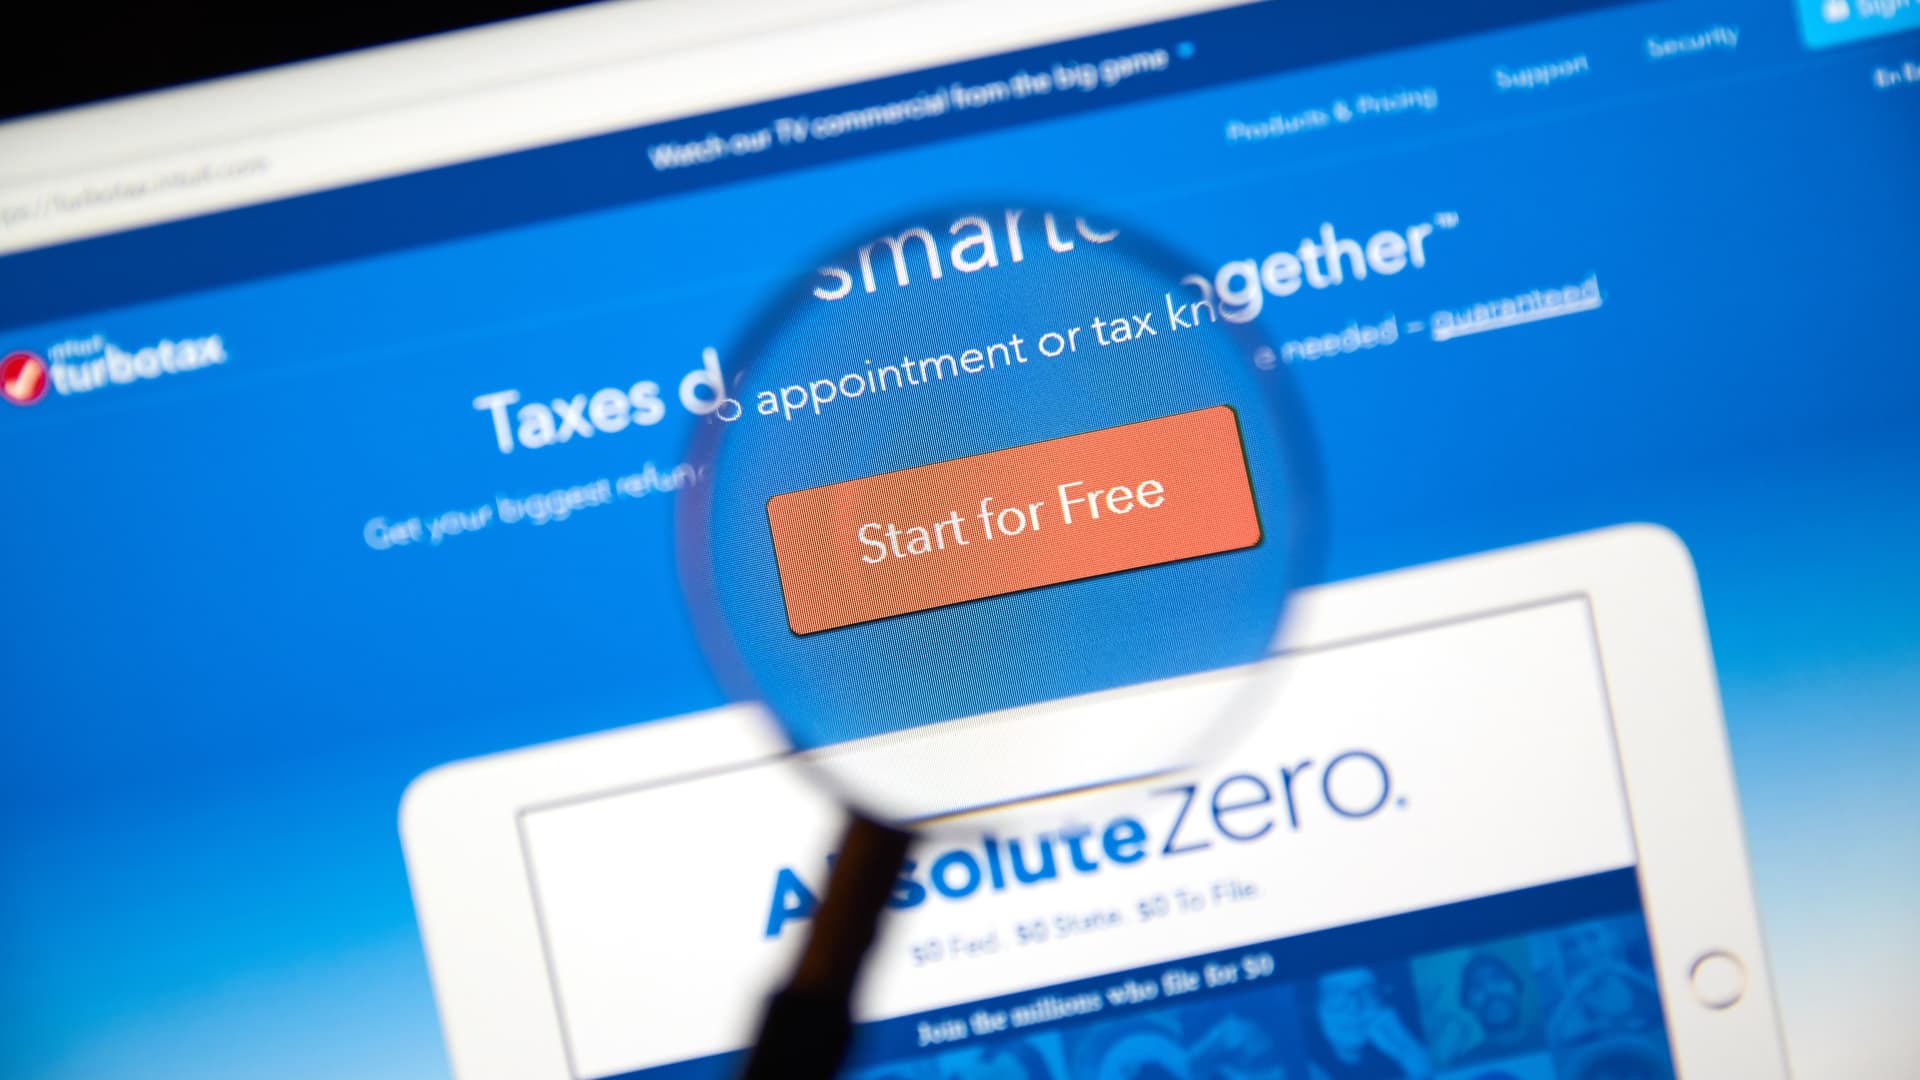 TurboTax vs. TaxAct: Which Tax Software Is Better?